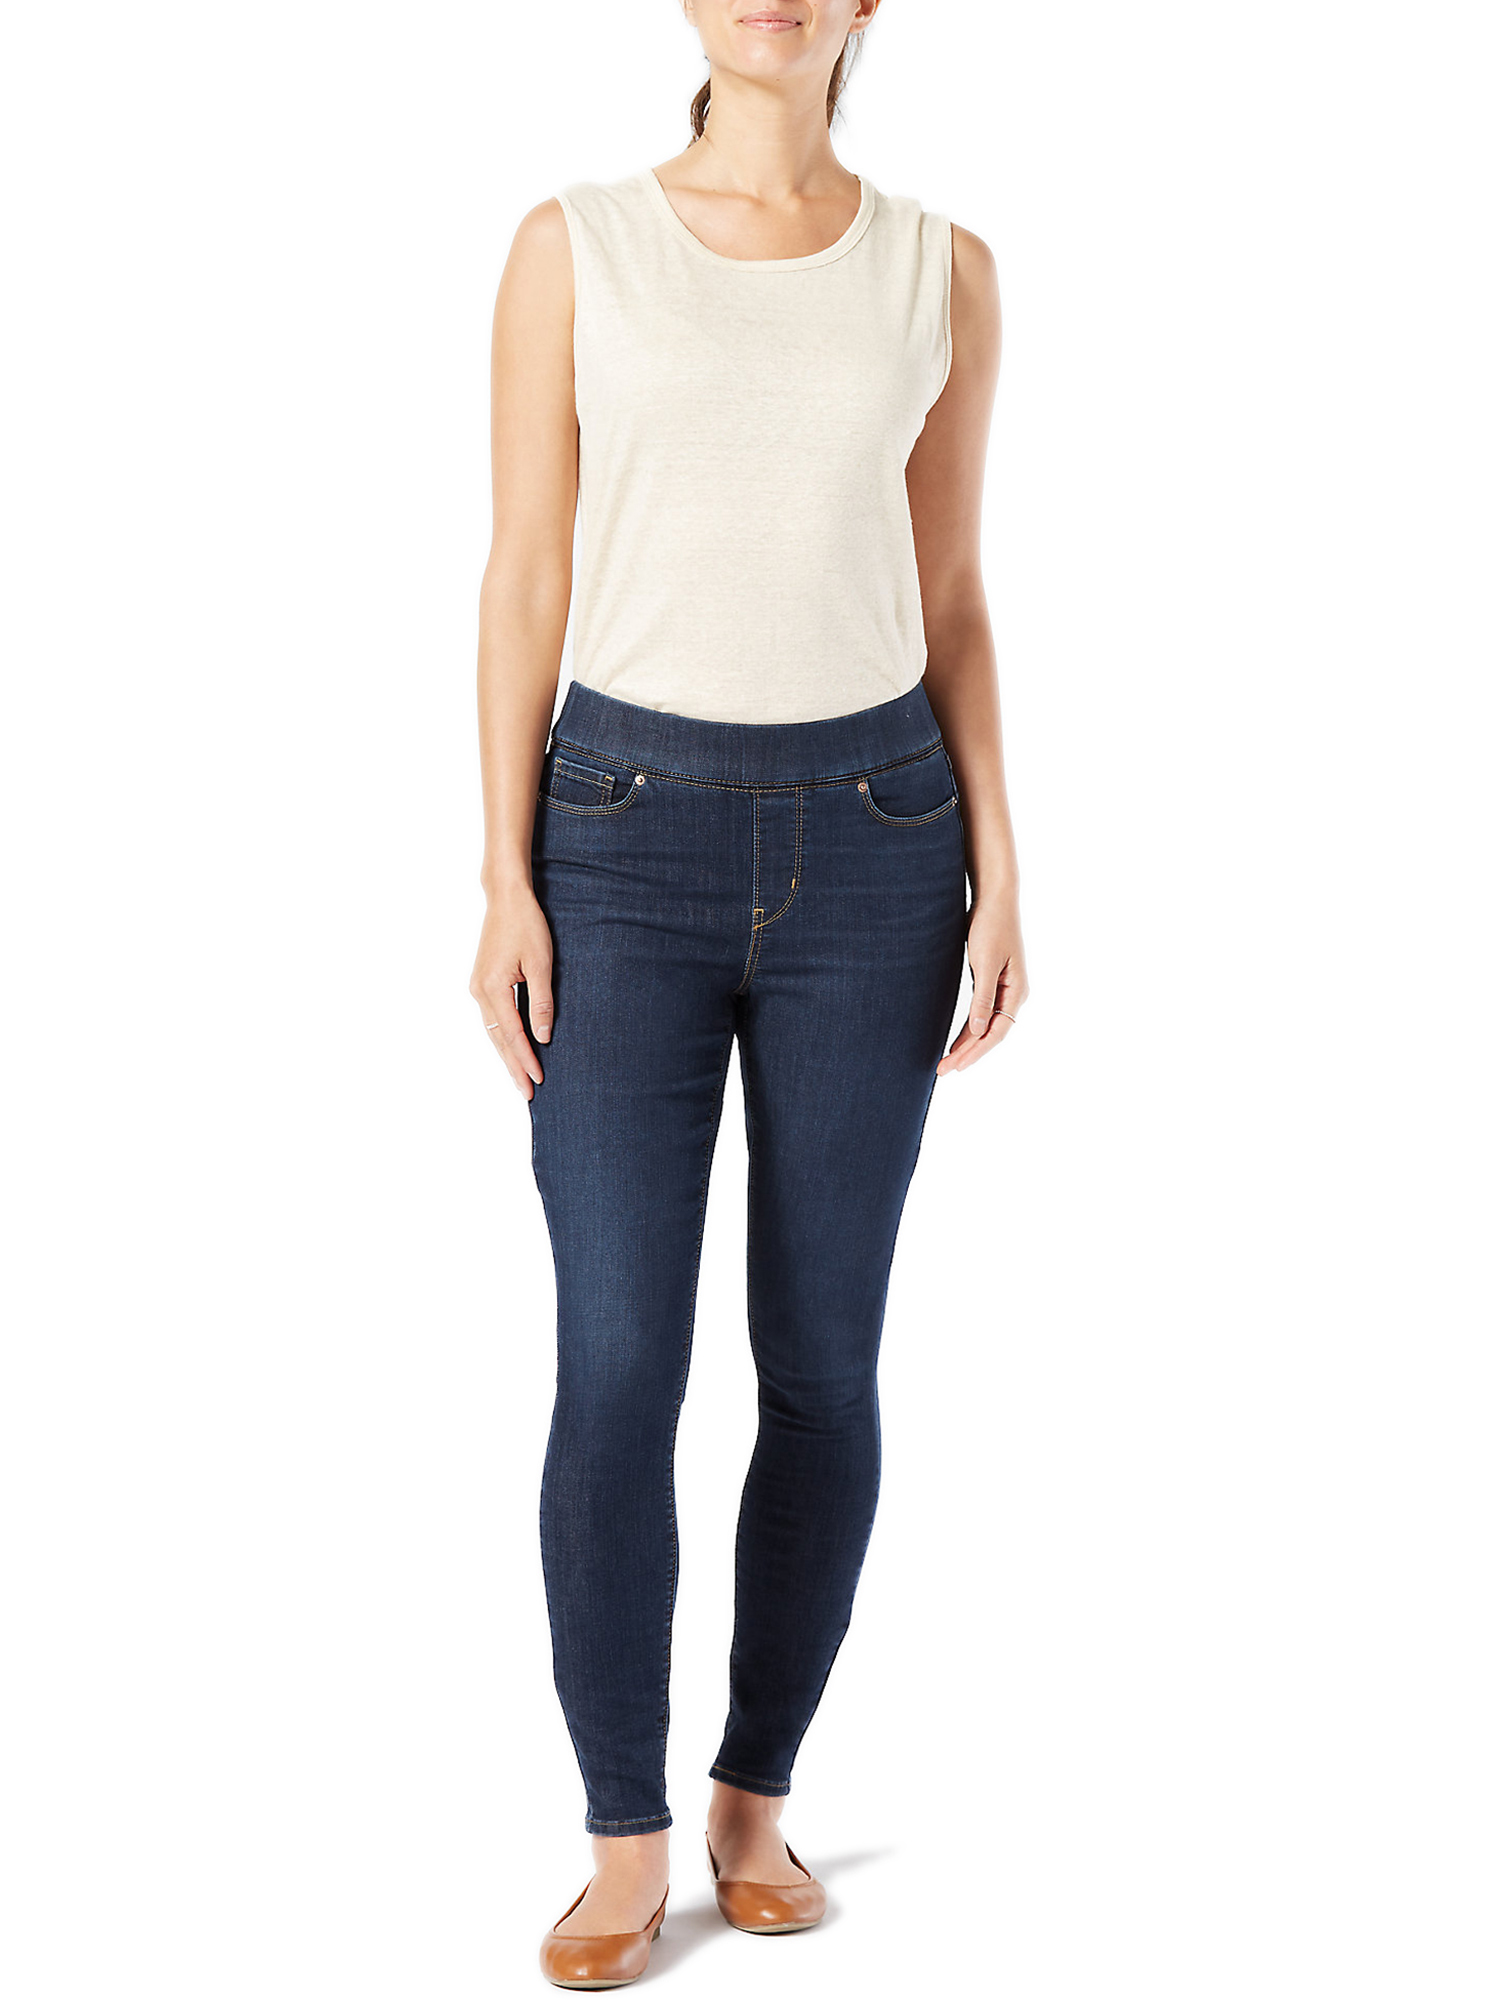 Signature by Levi Strauss & Co. Women's Simply Stretch Shaping Pull-On Super Skinny Jeans - image 4 of 6